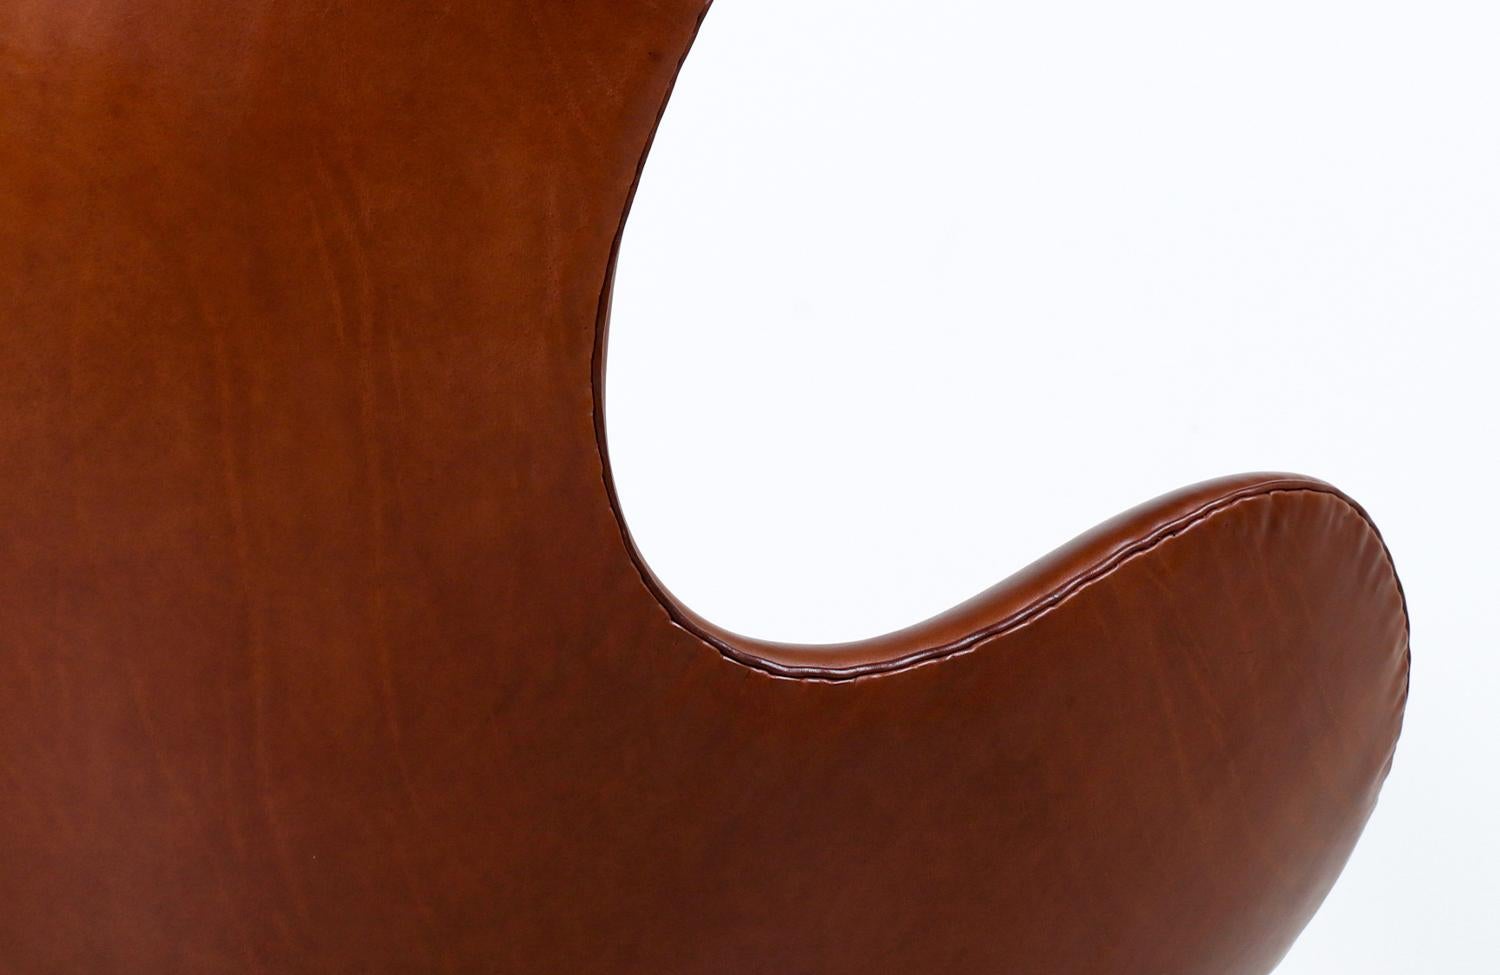 Expertly Restored - Danish Modern Cognac Leather “Egg” Chair by Arne Jacobsen For Sale 4